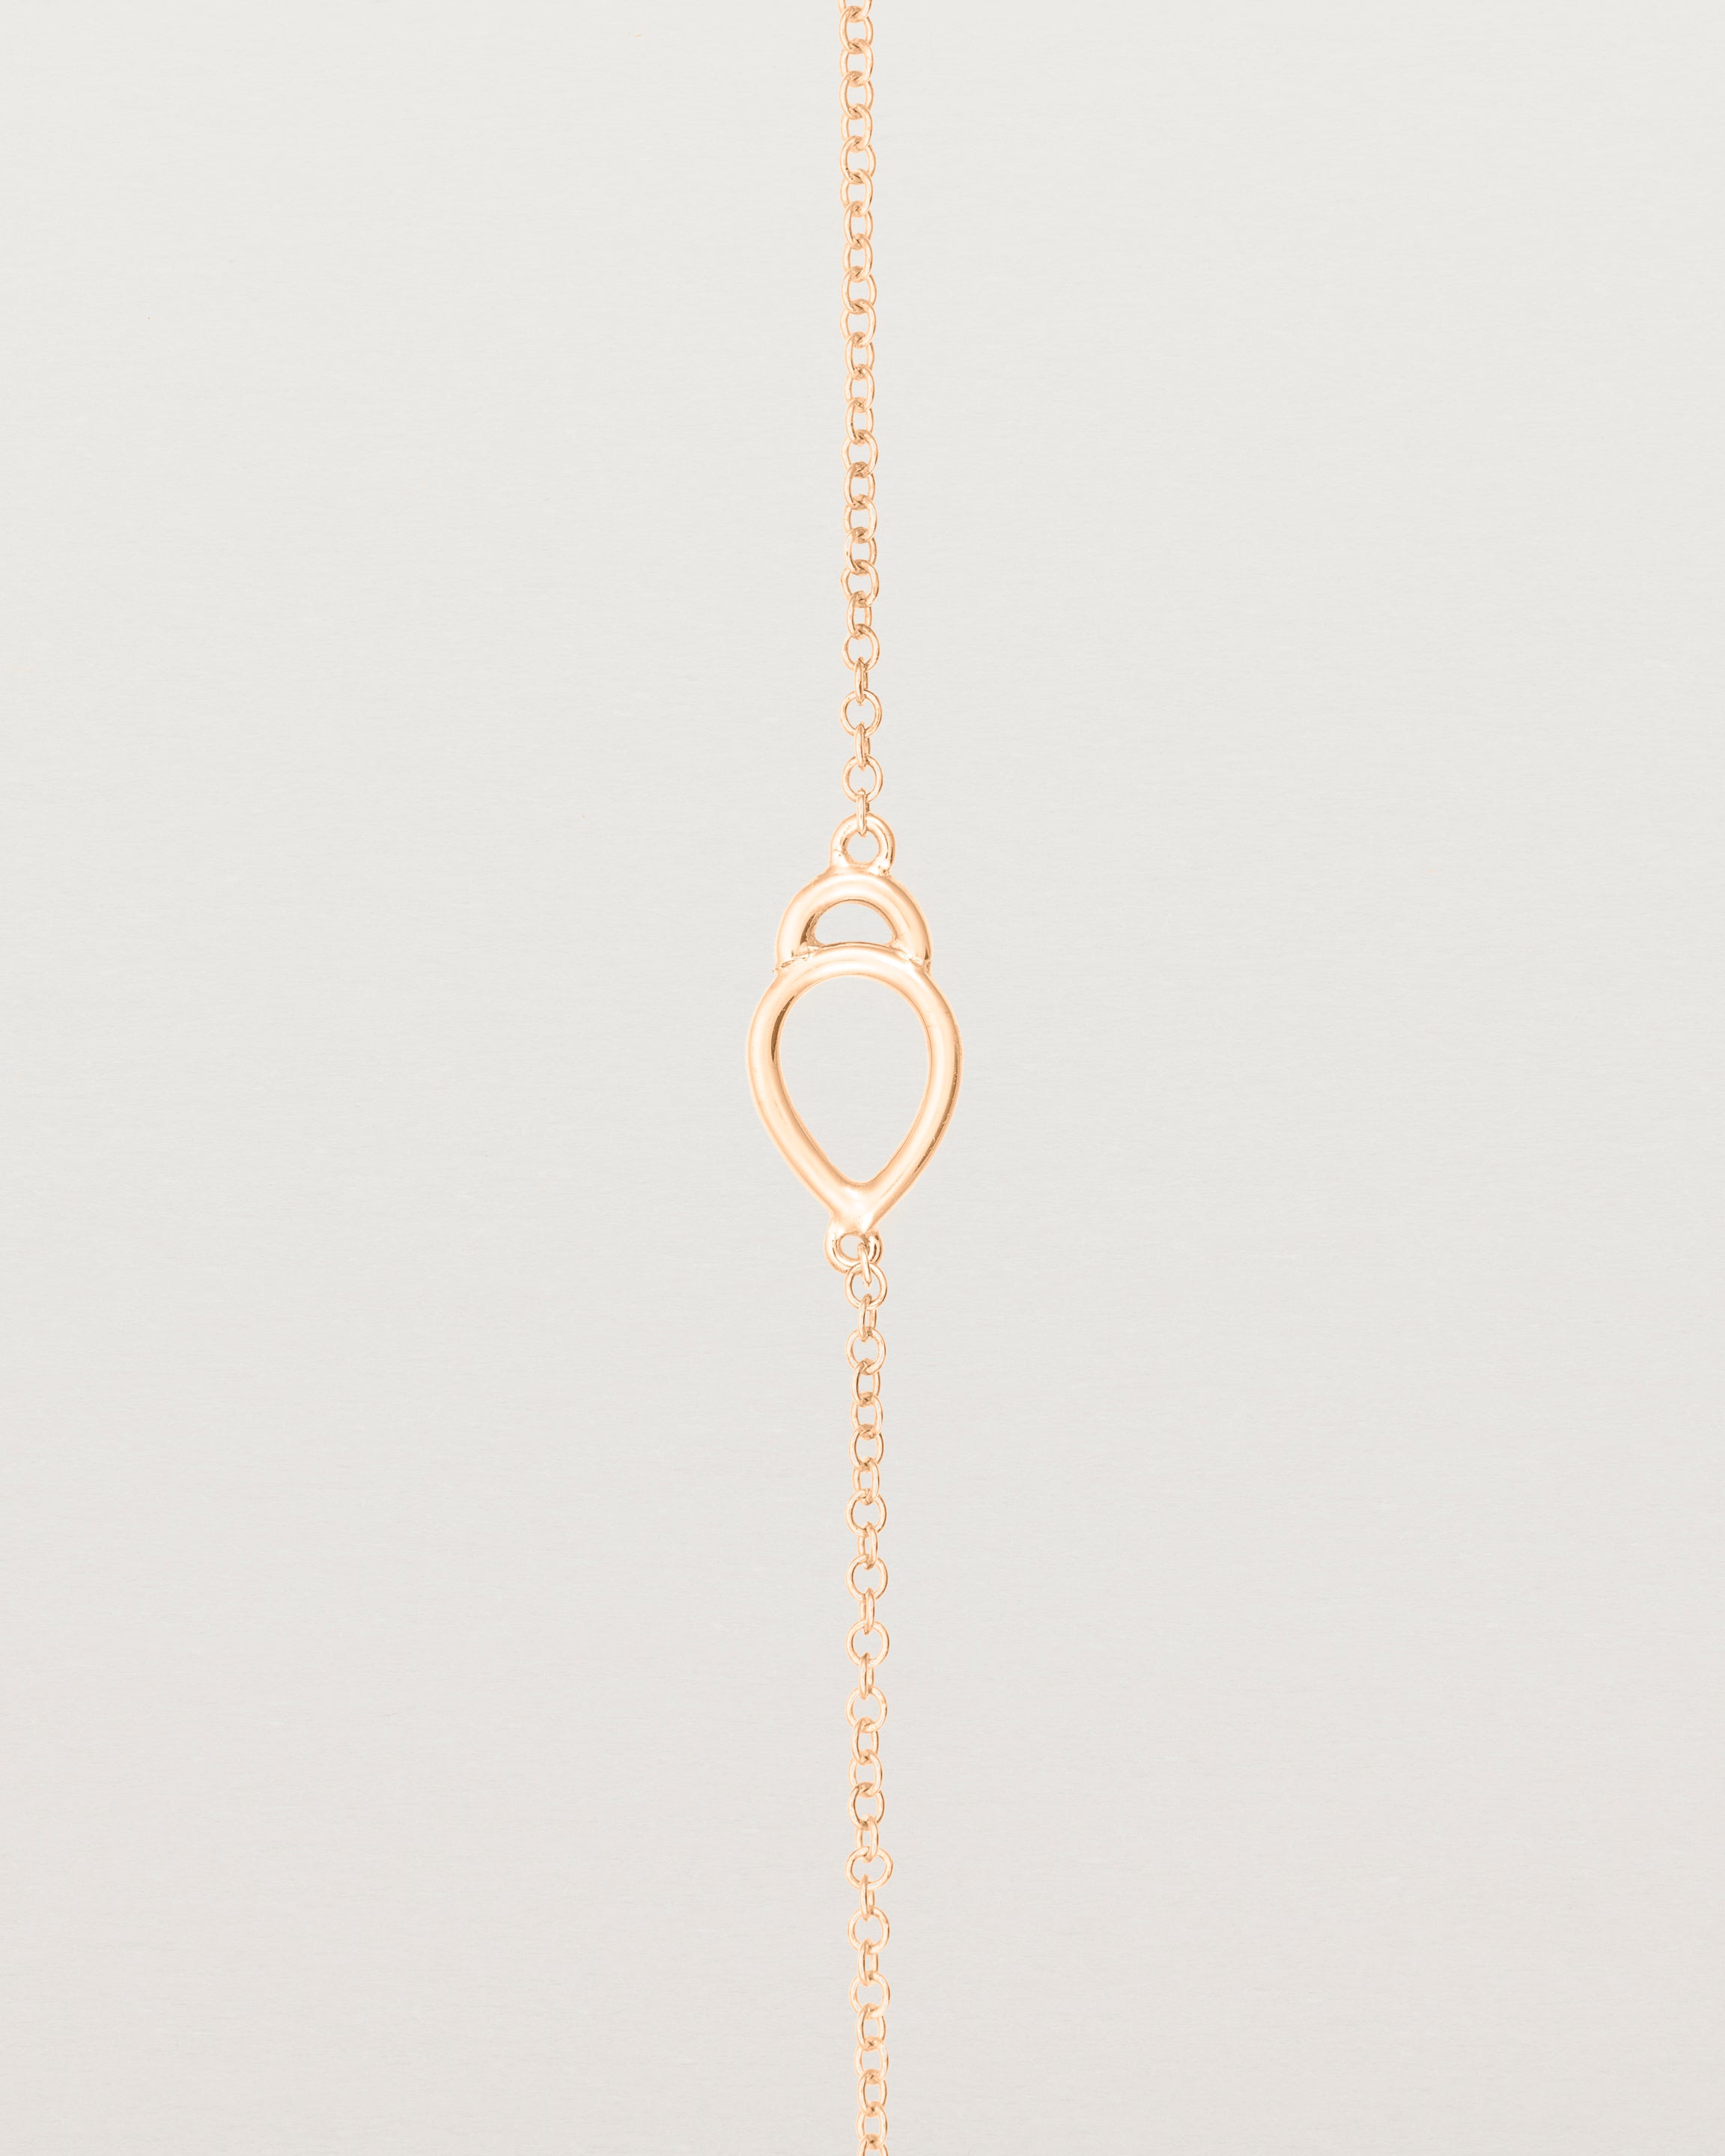 A rose gold chain with an oval pendant